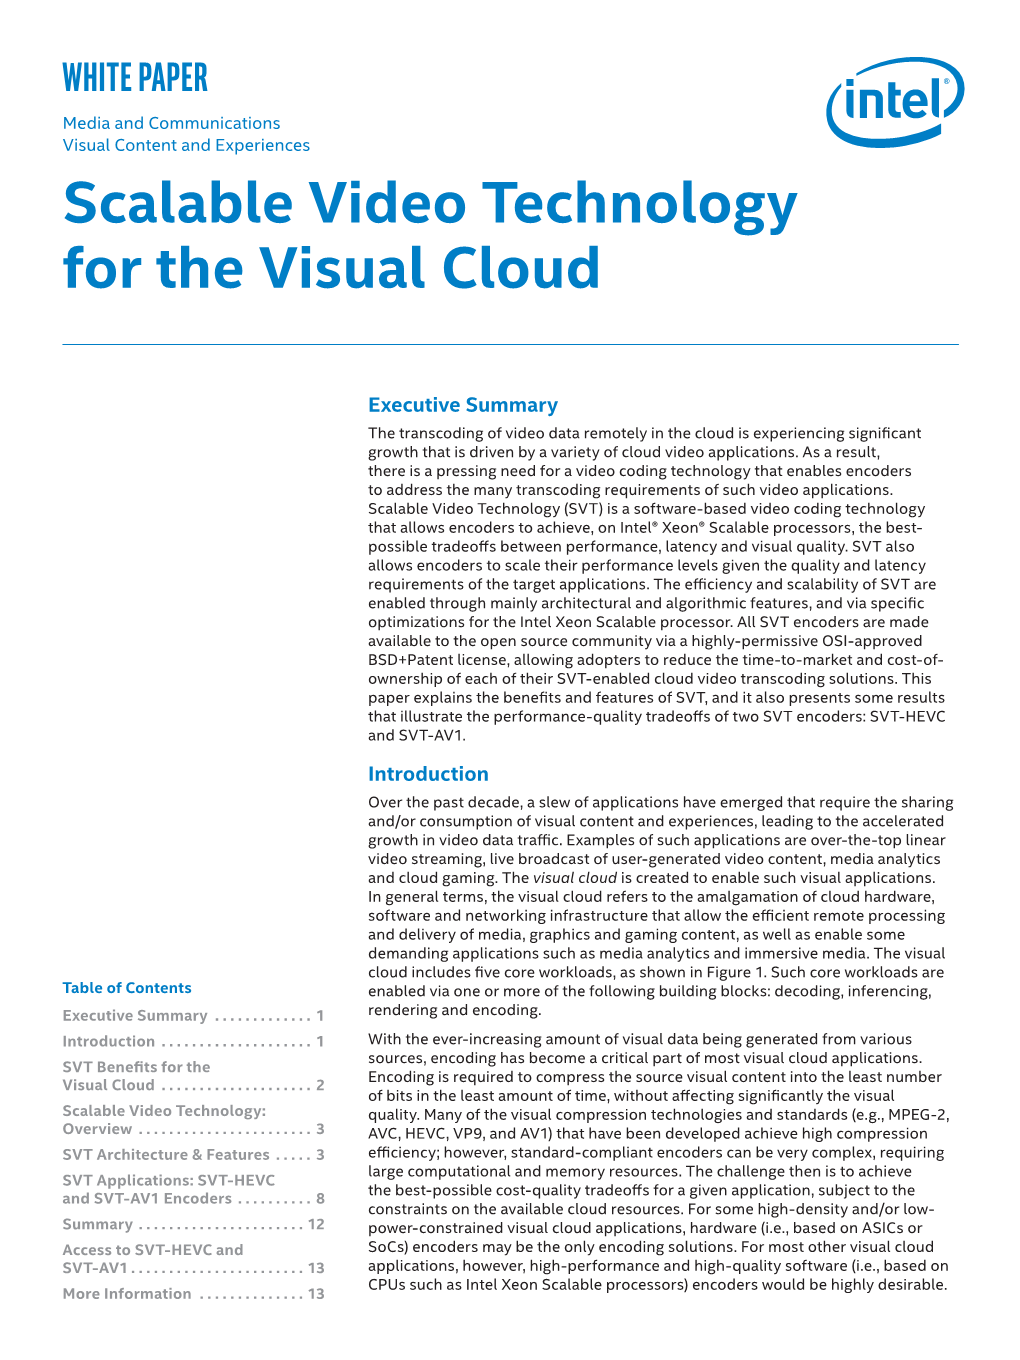 Scalable Video Technology for the Visual Cloud